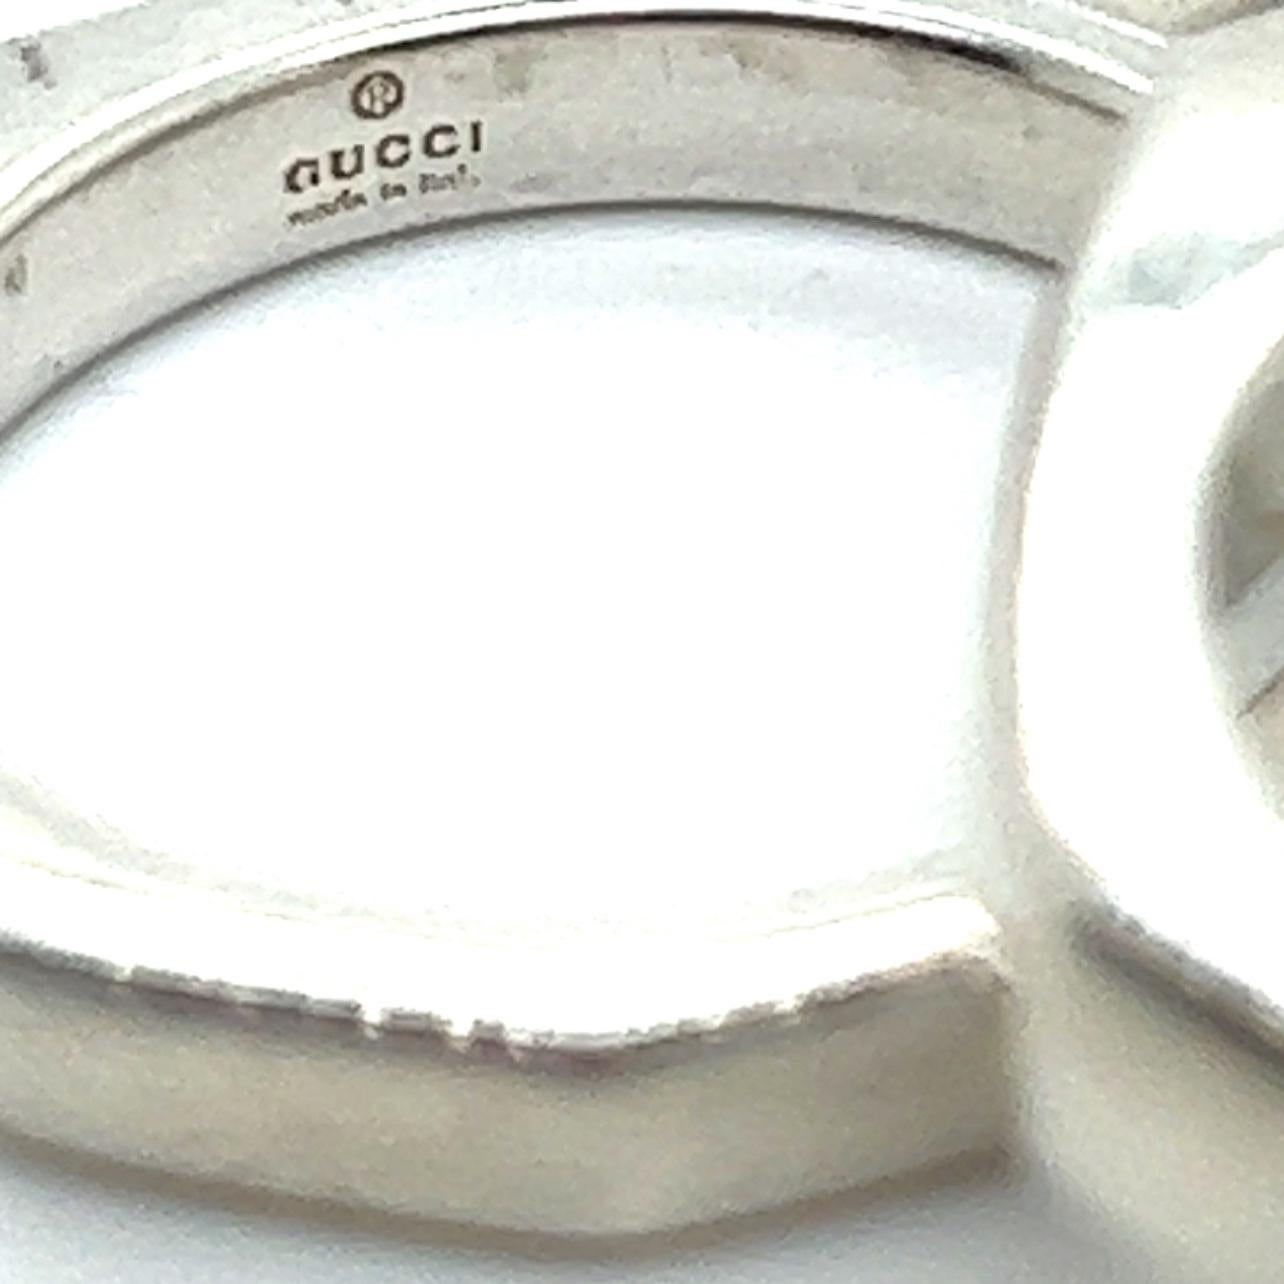 gucci ring size 10